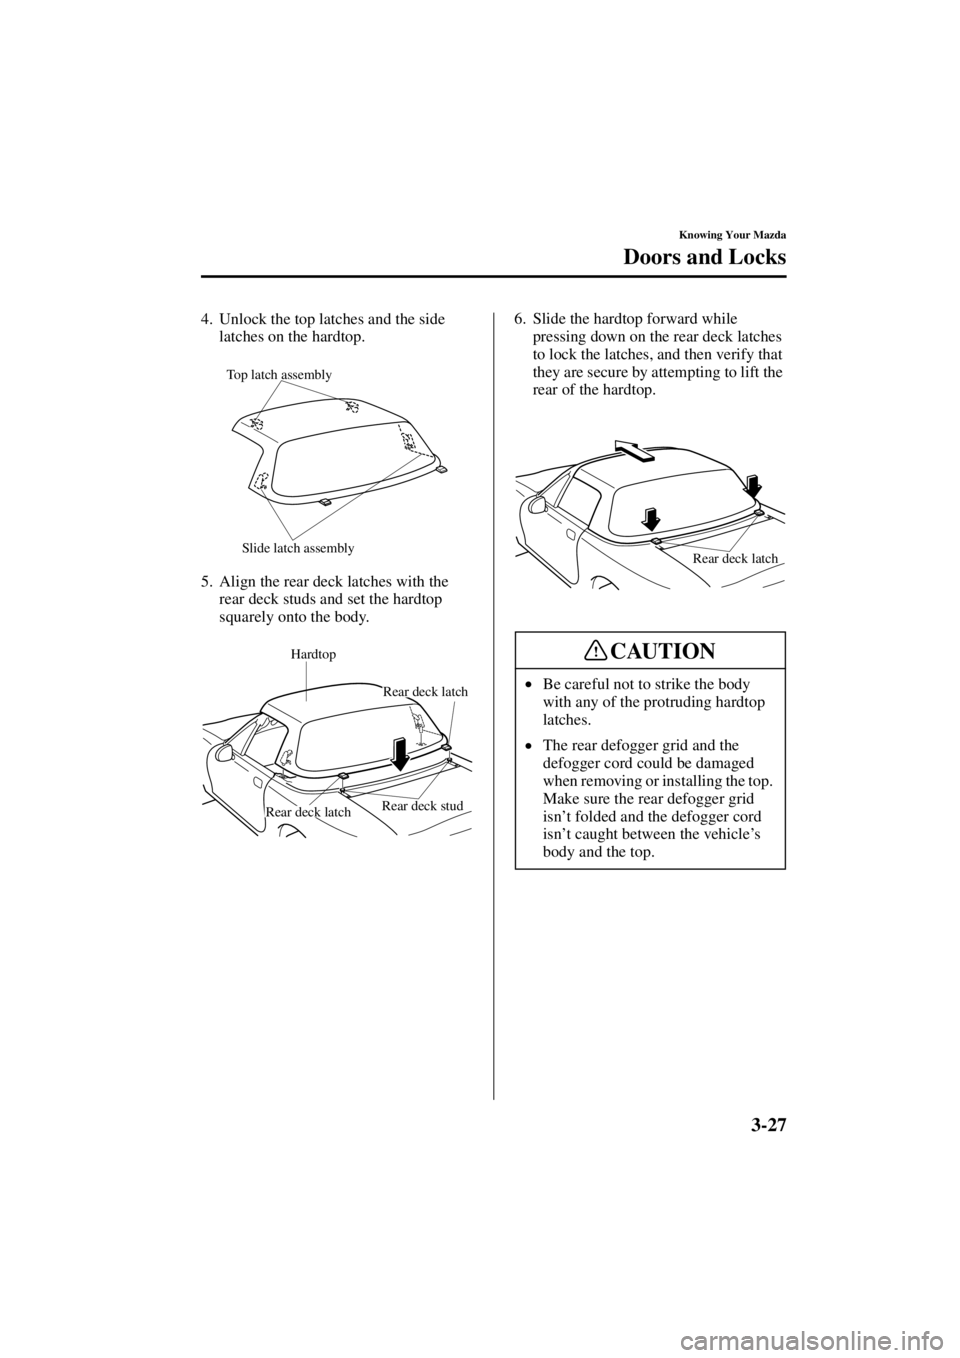 MAZDA MODEL SPEED MX-5 MIATA 2004 Repair Manual 3-27
Knowing Your Mazda
Doors and Locks
Form No. 8T02-EA-03L
4. Unlock the top latches and the side latches on the hardtop.
5. Align the rear deck latches with the  rear deck studs and set the hardtop